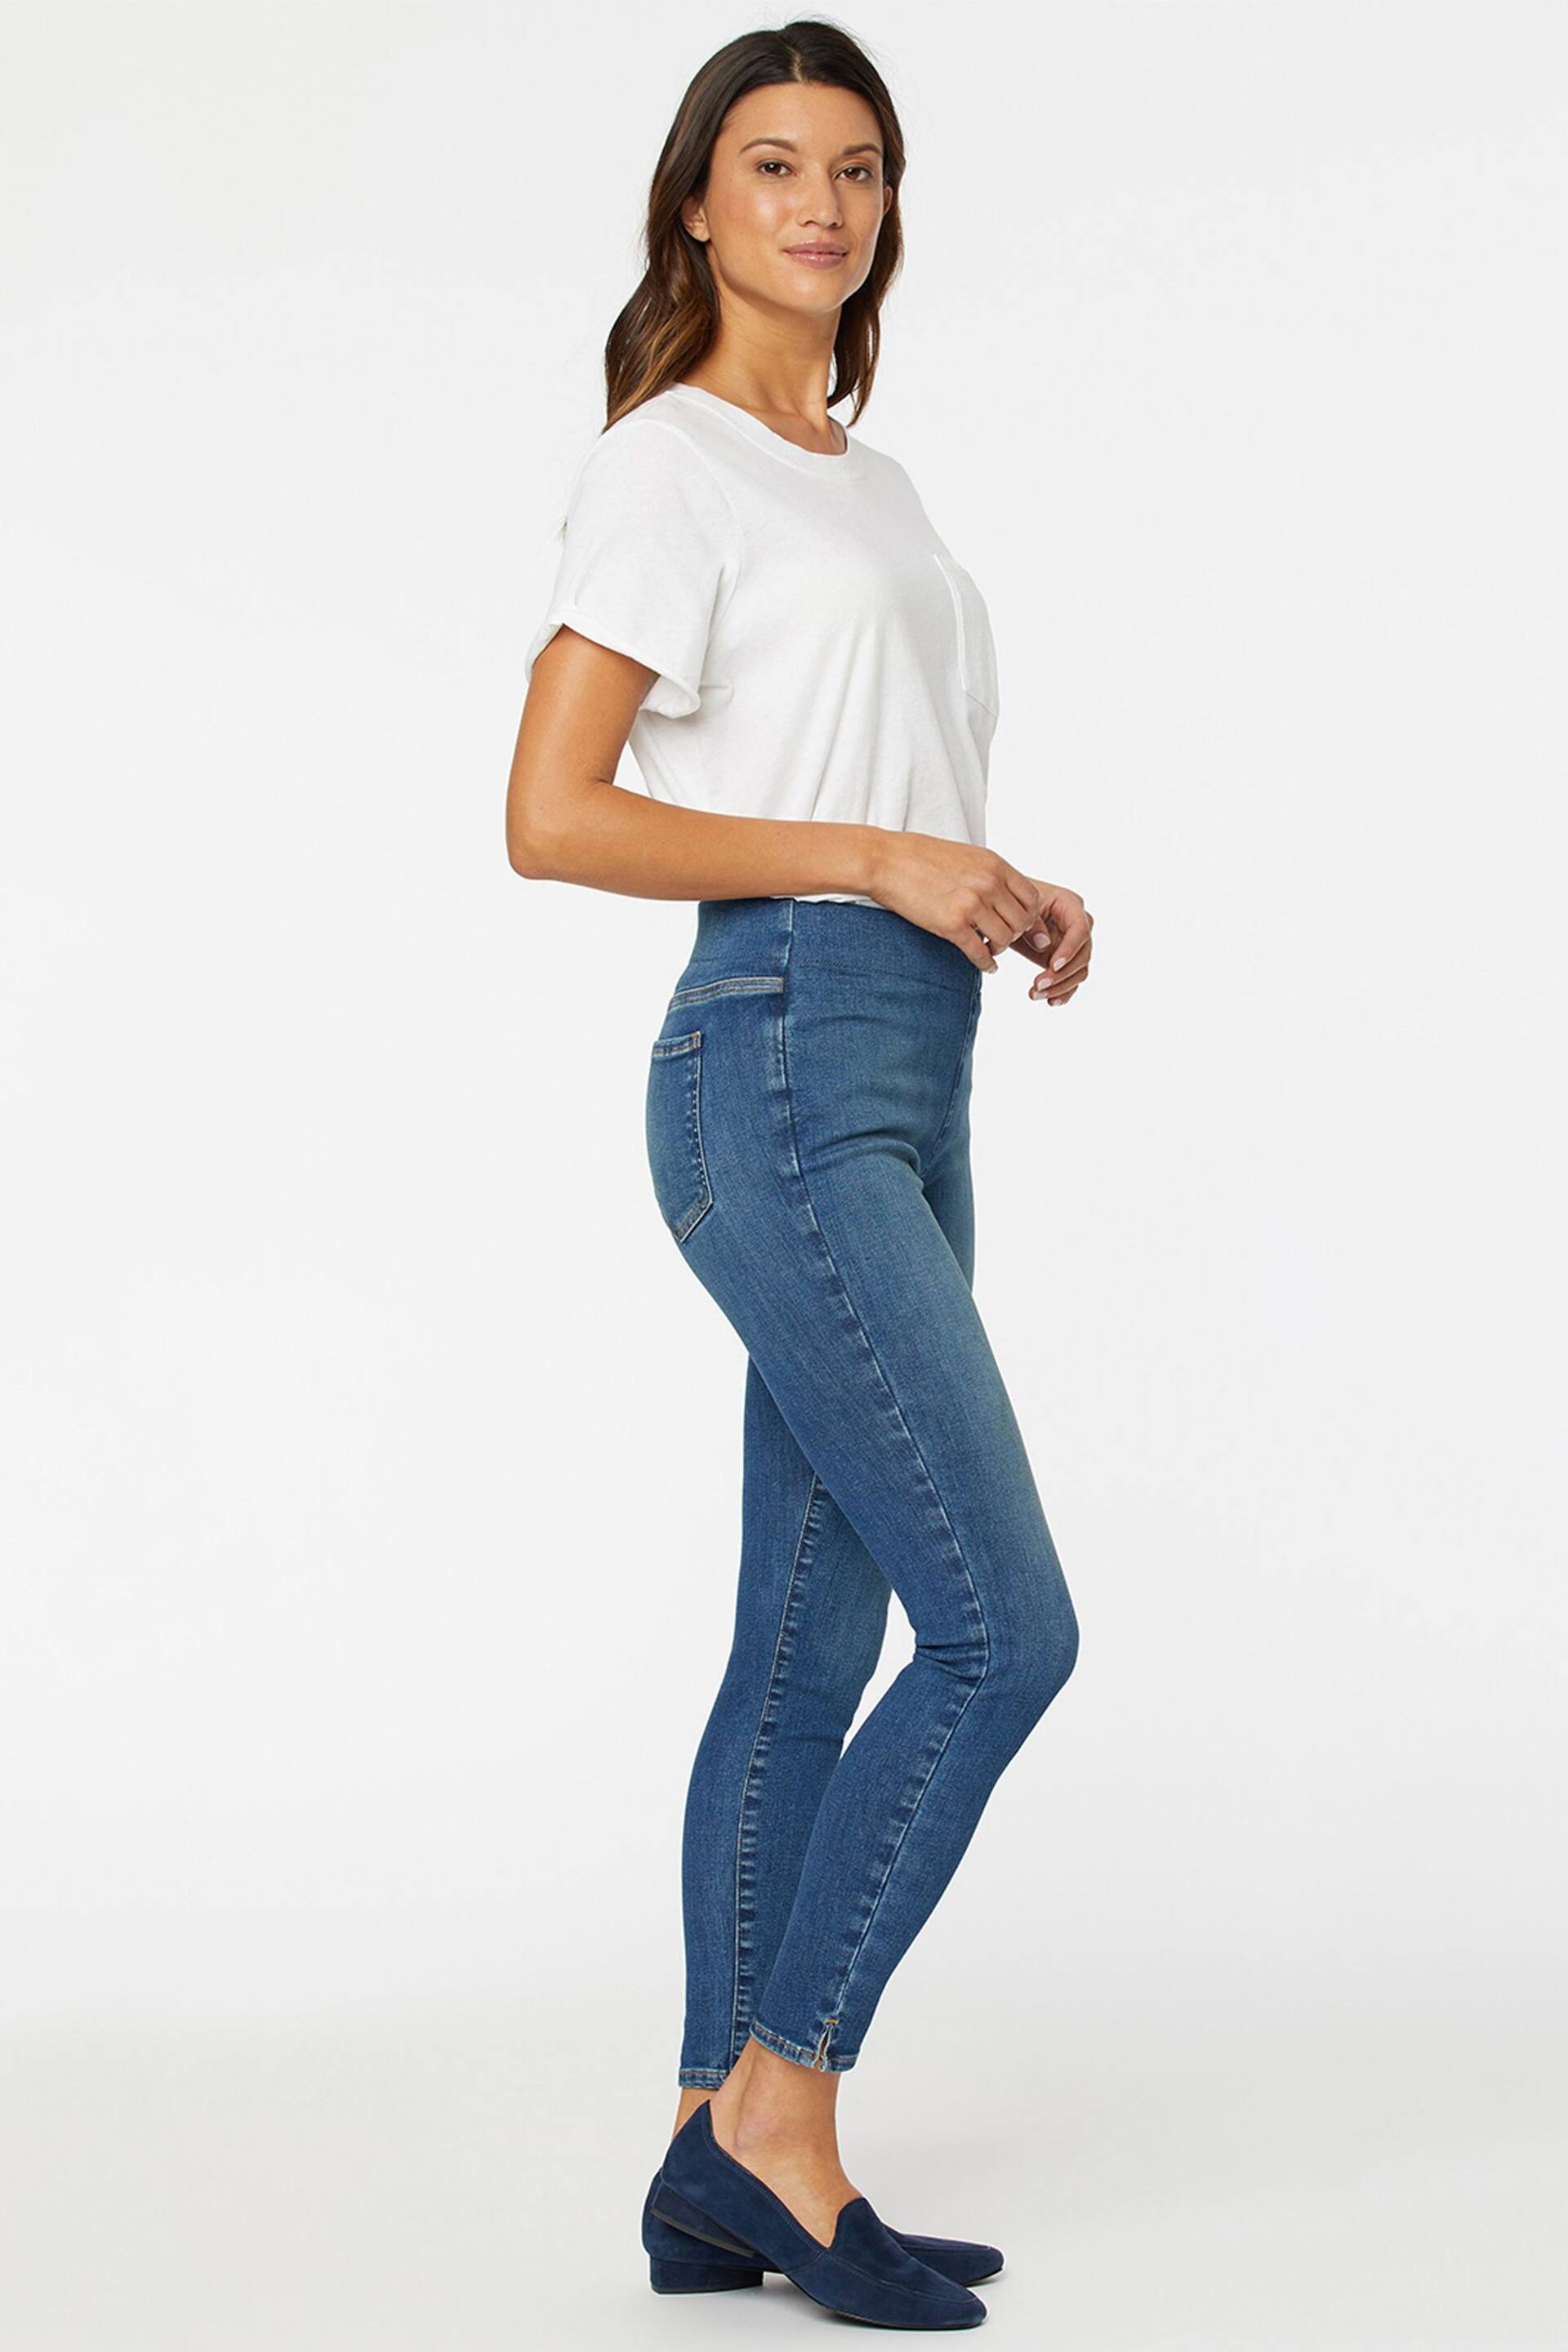 NYDJ Pull-On Skinny Ankle Jeans in SpanSpring™ - Image 3 of 7